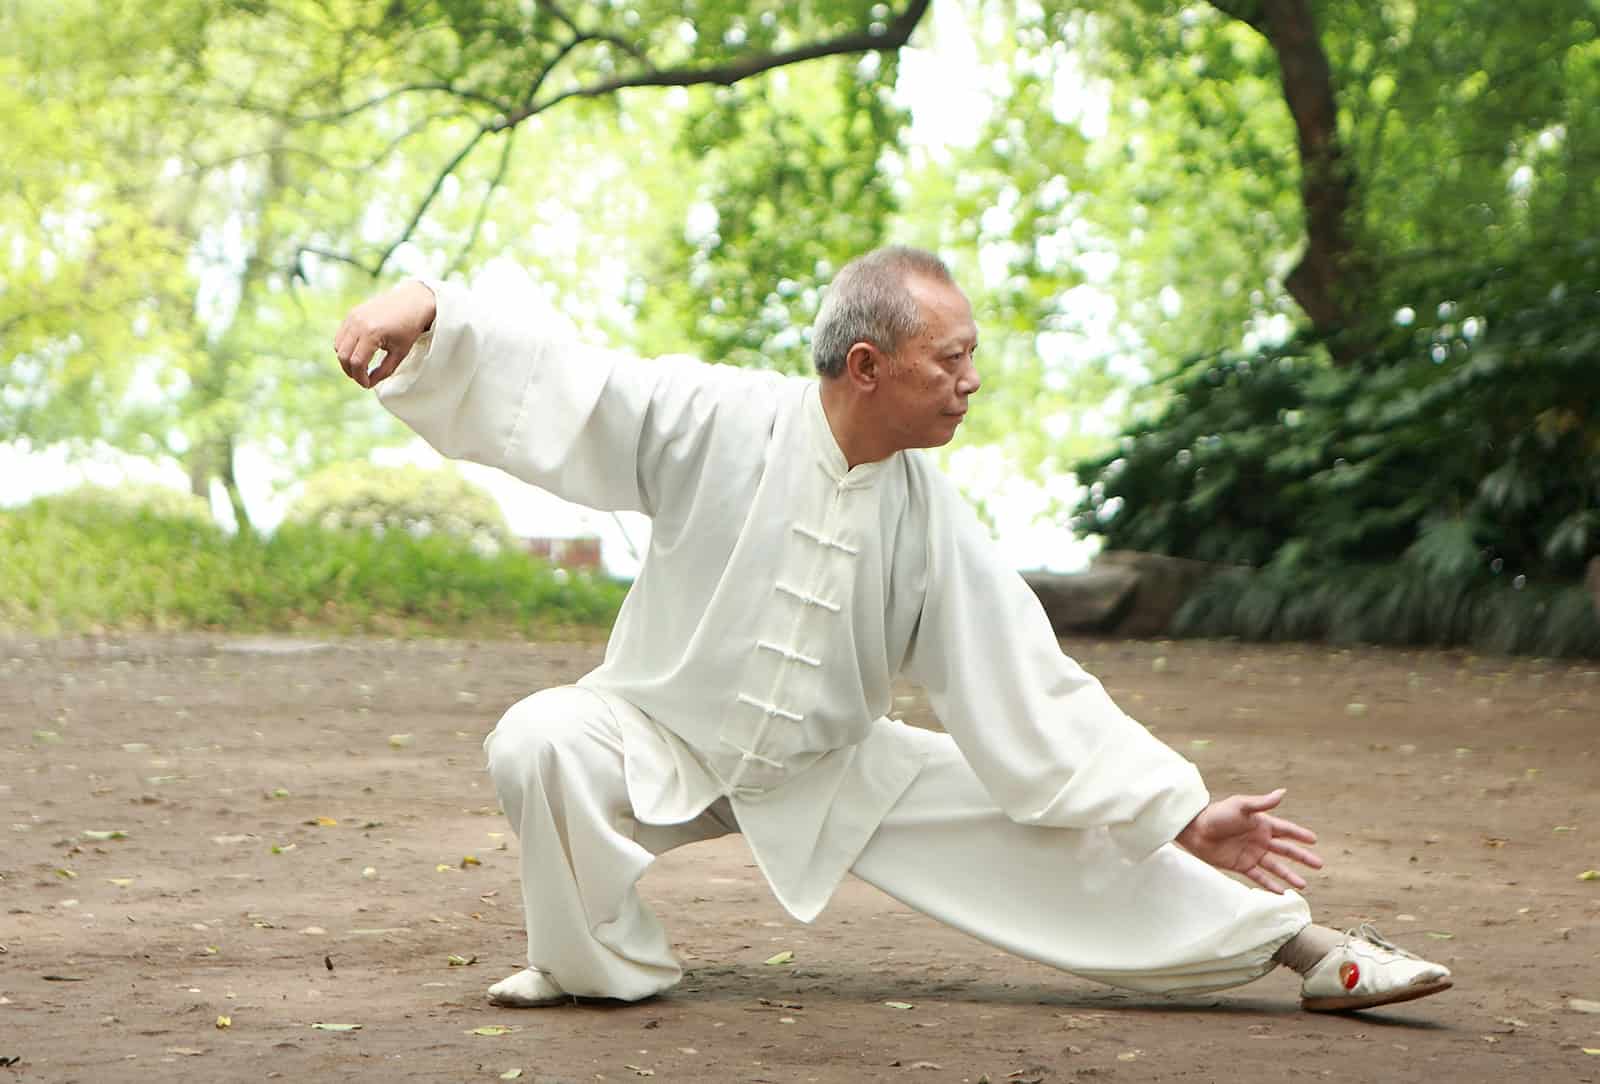  An elderly man practices Tai Chi in a park for health and wellness.